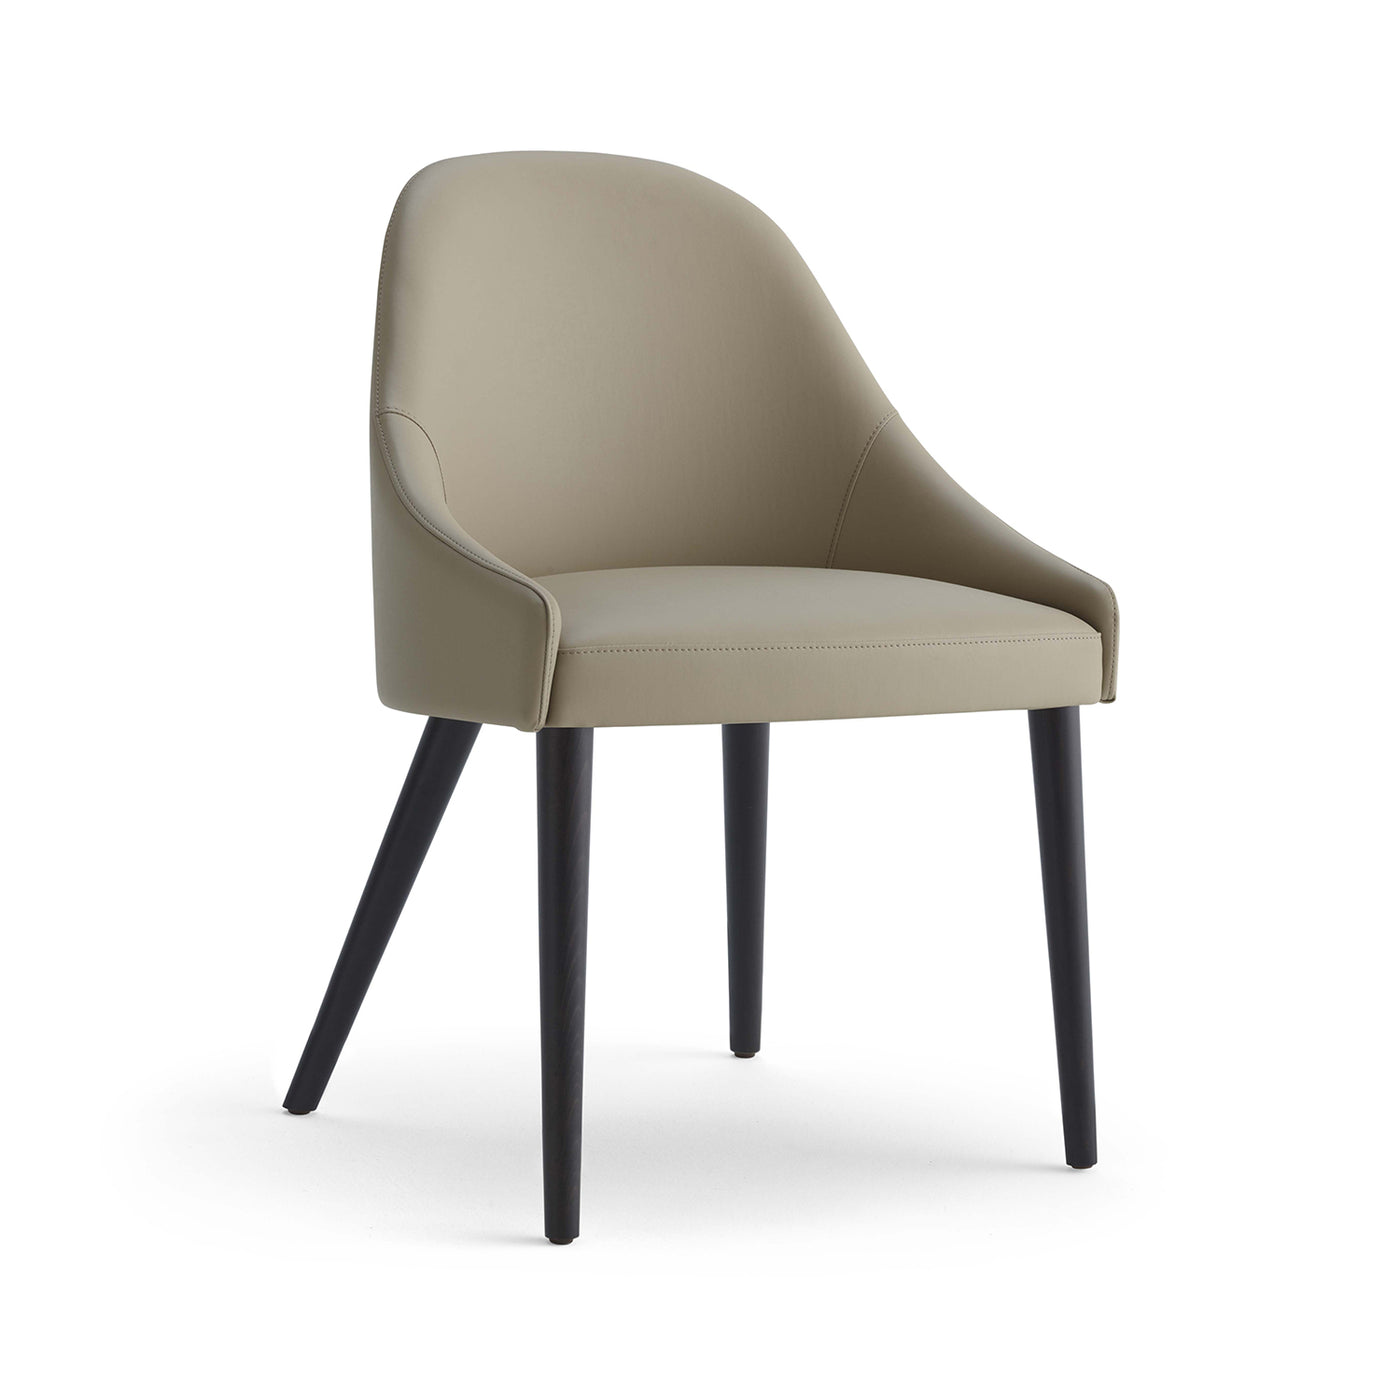 Aden Dining Chair